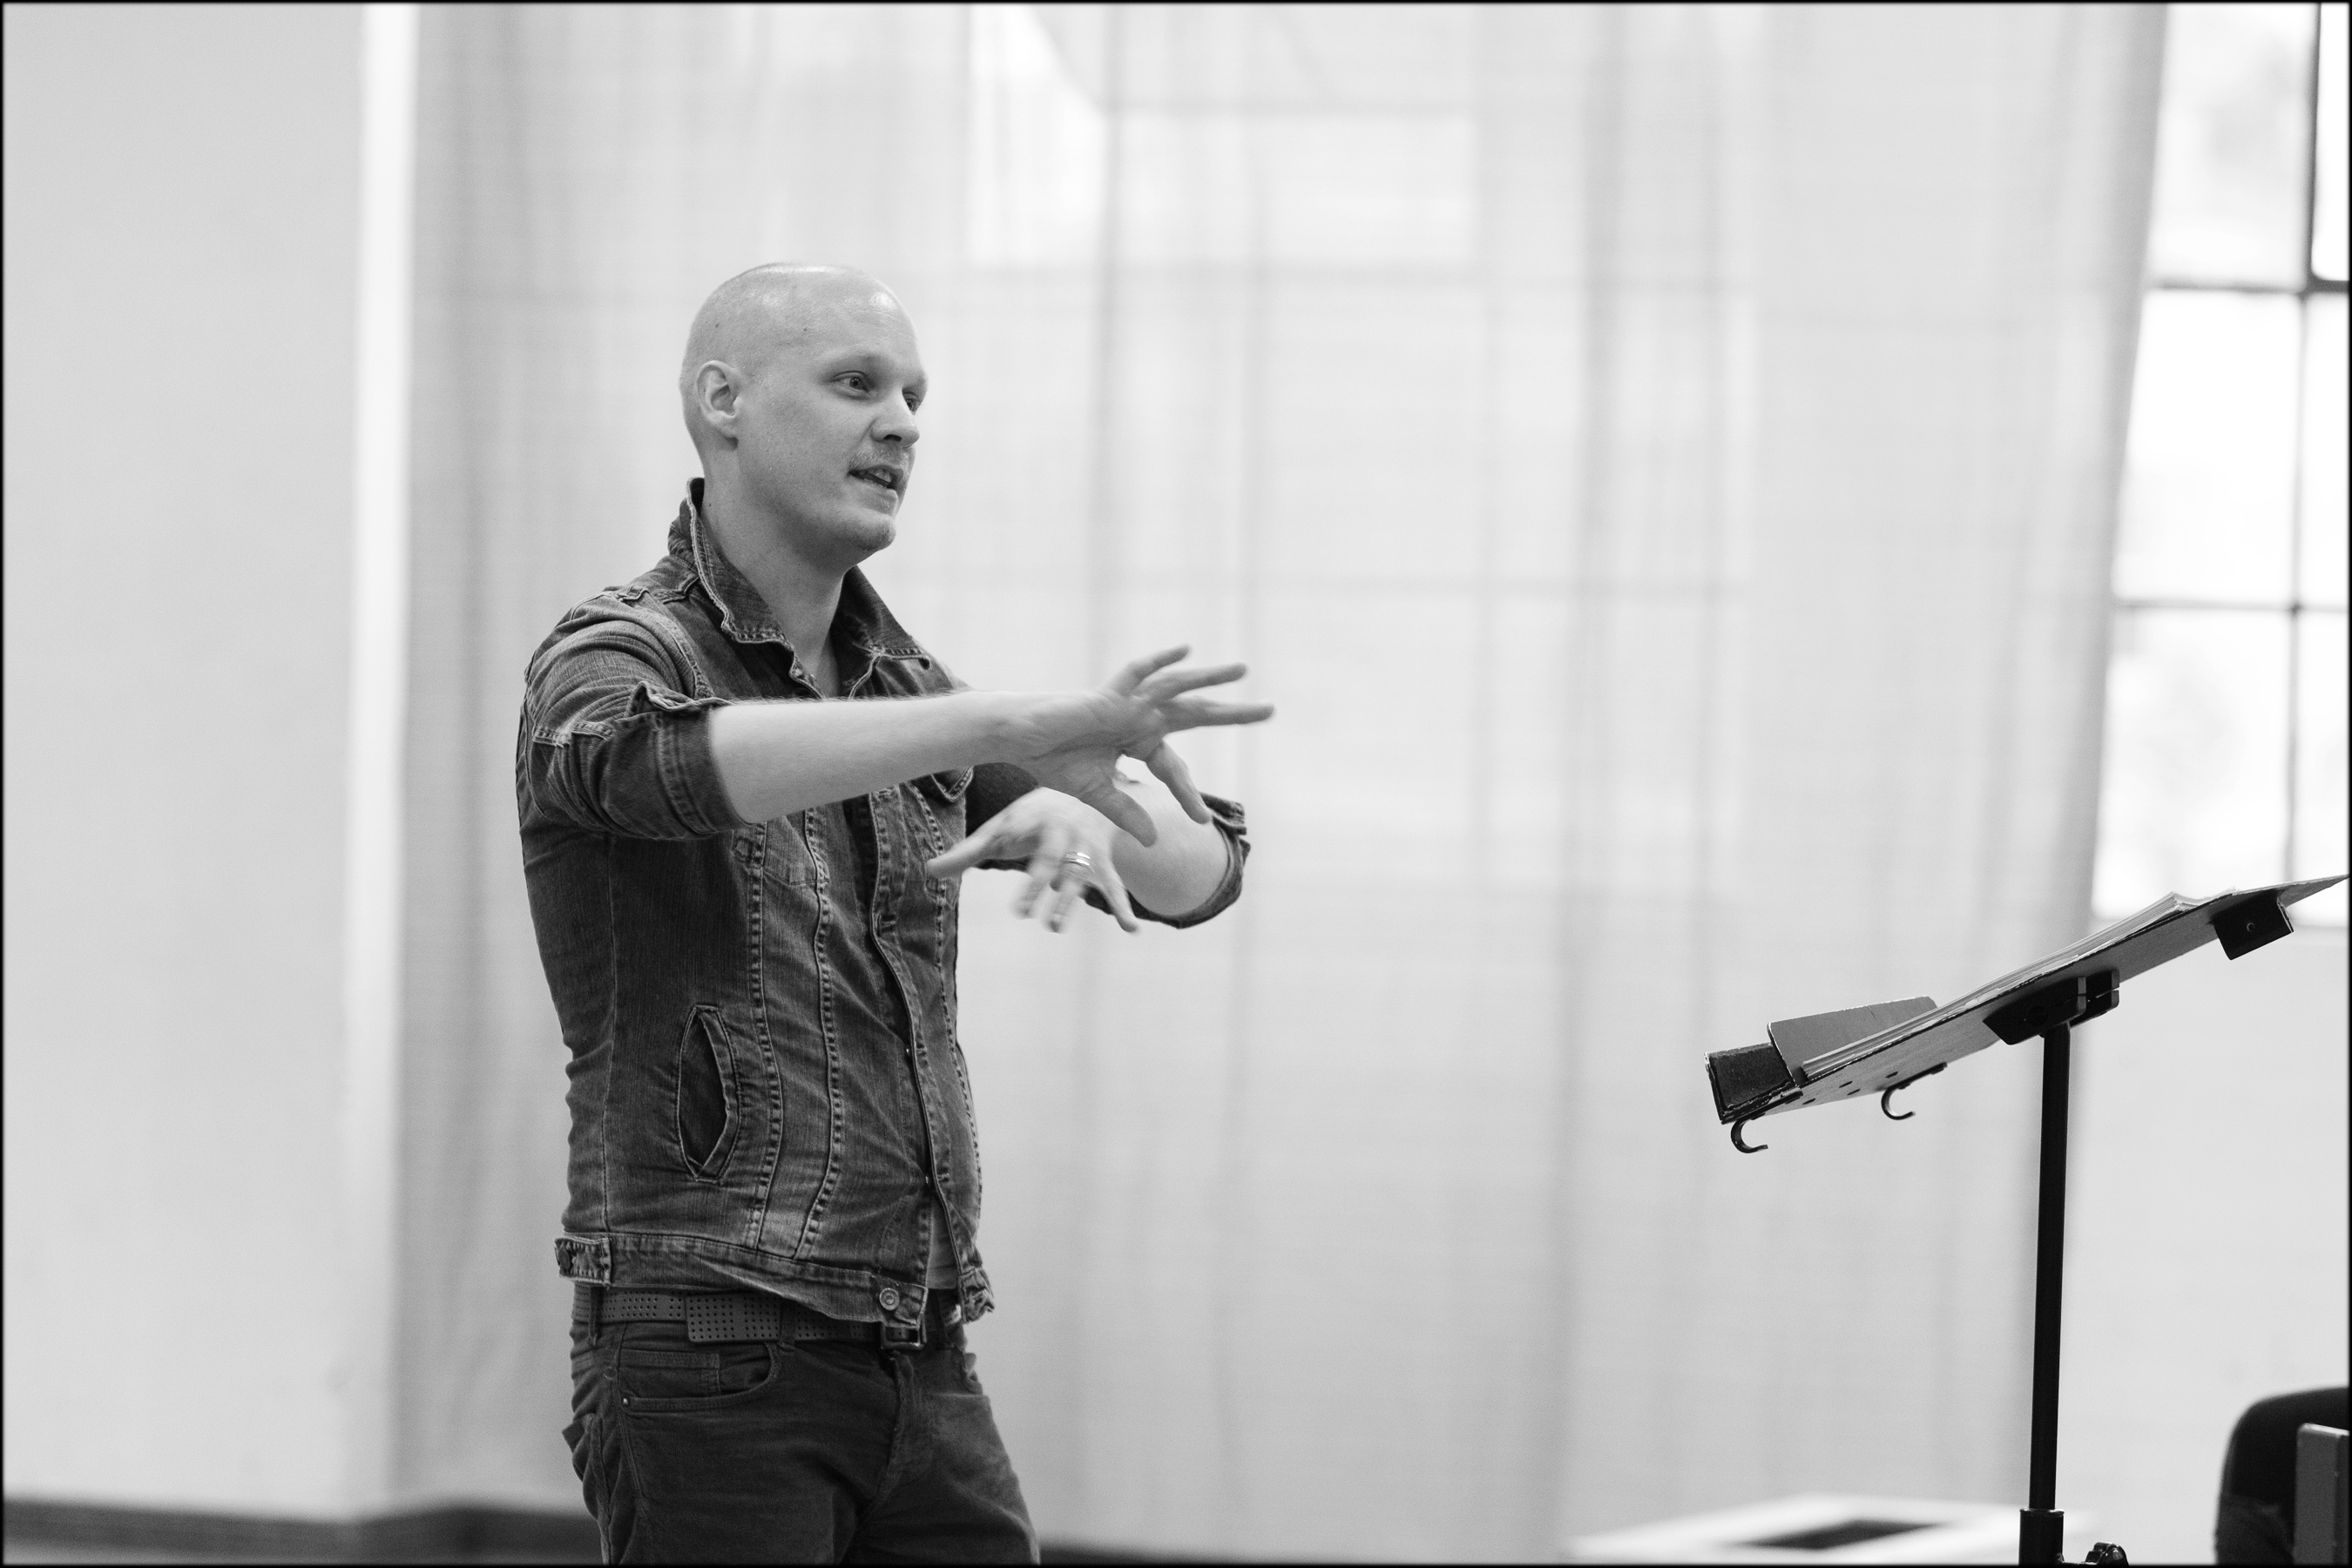 Double trouble with the twins – Pinchgut rehearses for ‘Castor and Pollux’